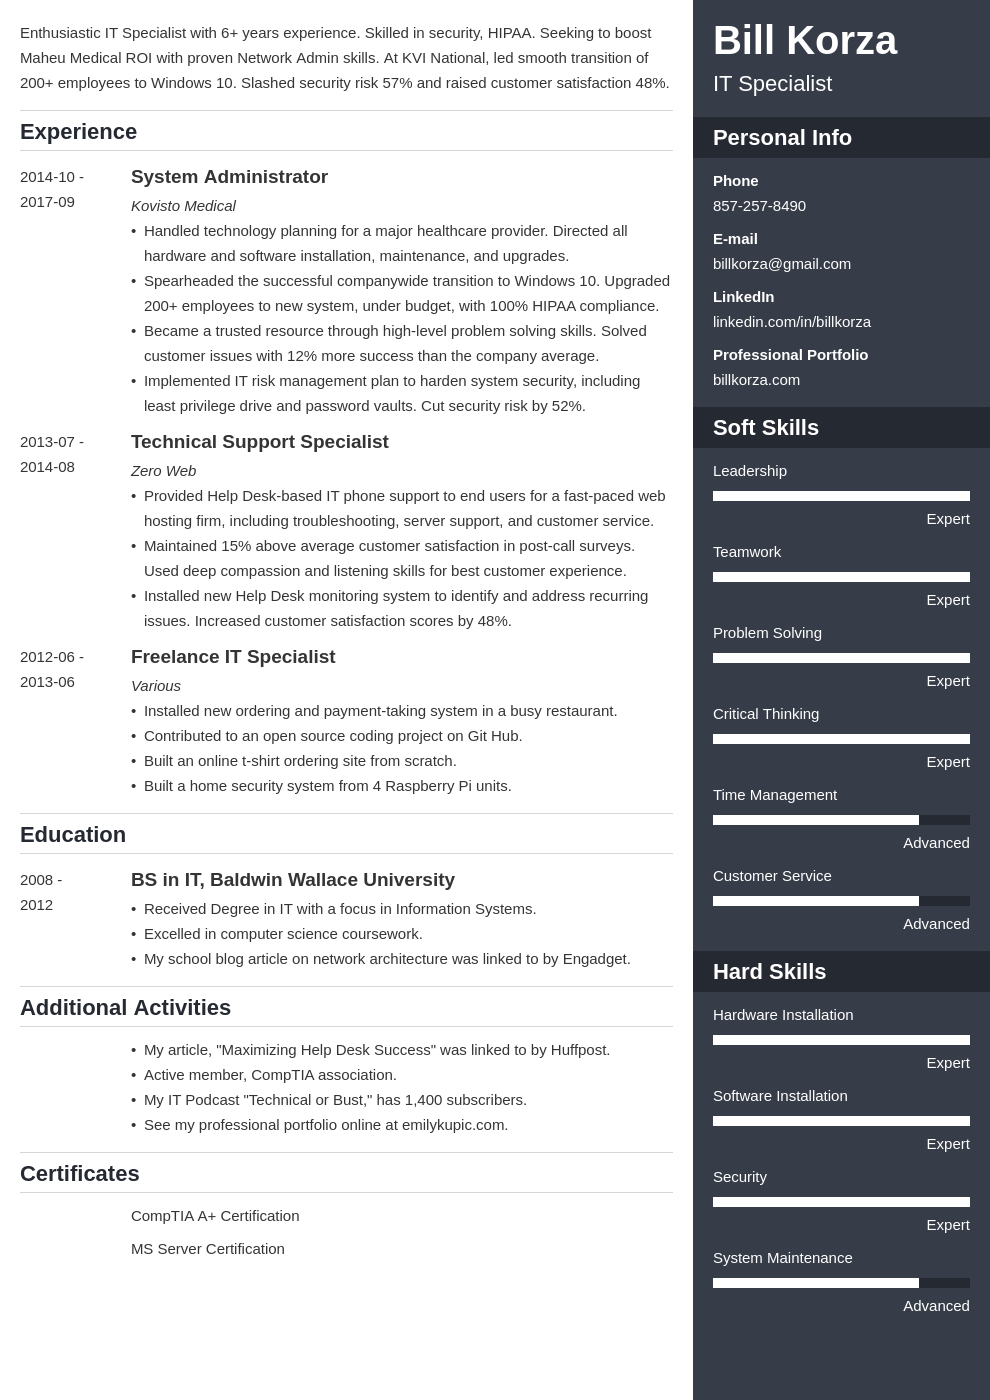 19 Professional Resume Profile Examples & Section Template